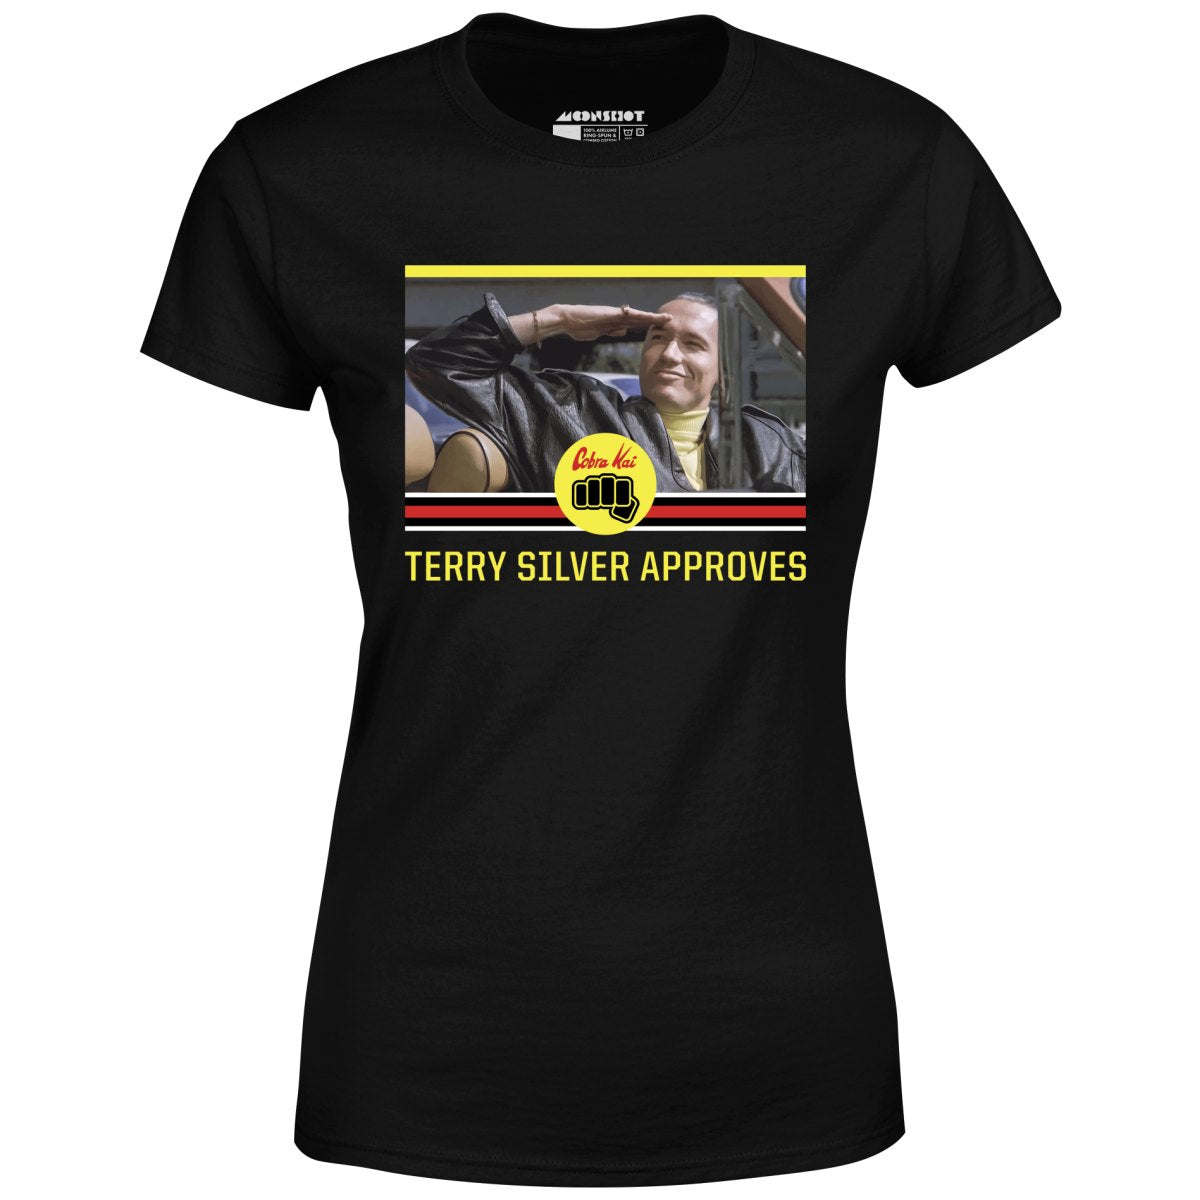 Terry Silver Approves - Women's T-Shirt